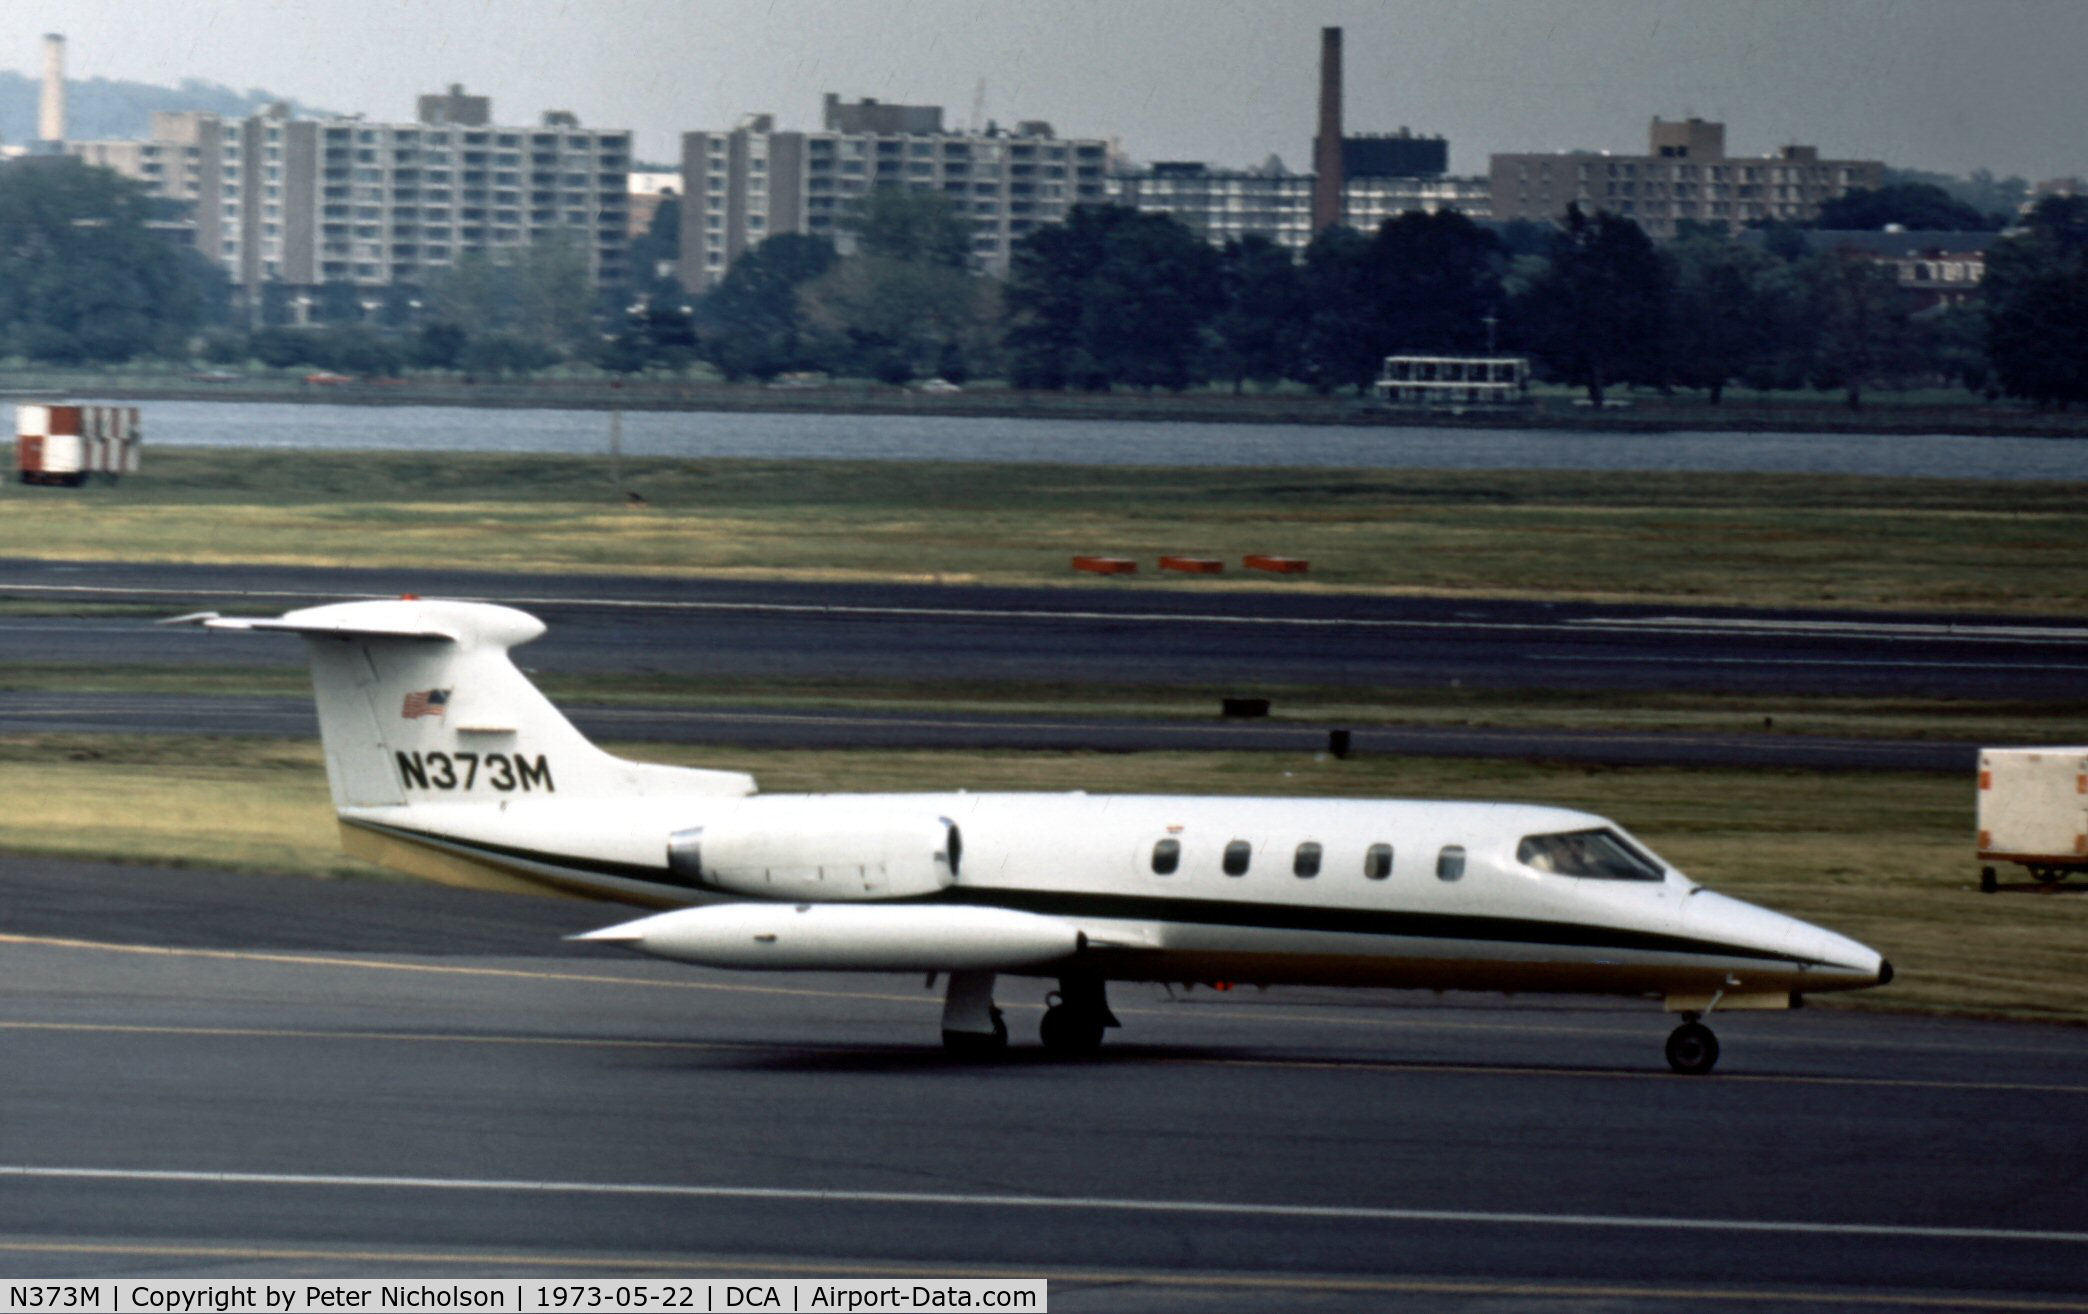 N373M, 1969 Learjet 25 C/N 25-032, Learjet 25 taxying to the terminal at what was then known as Washington National in May 1973.